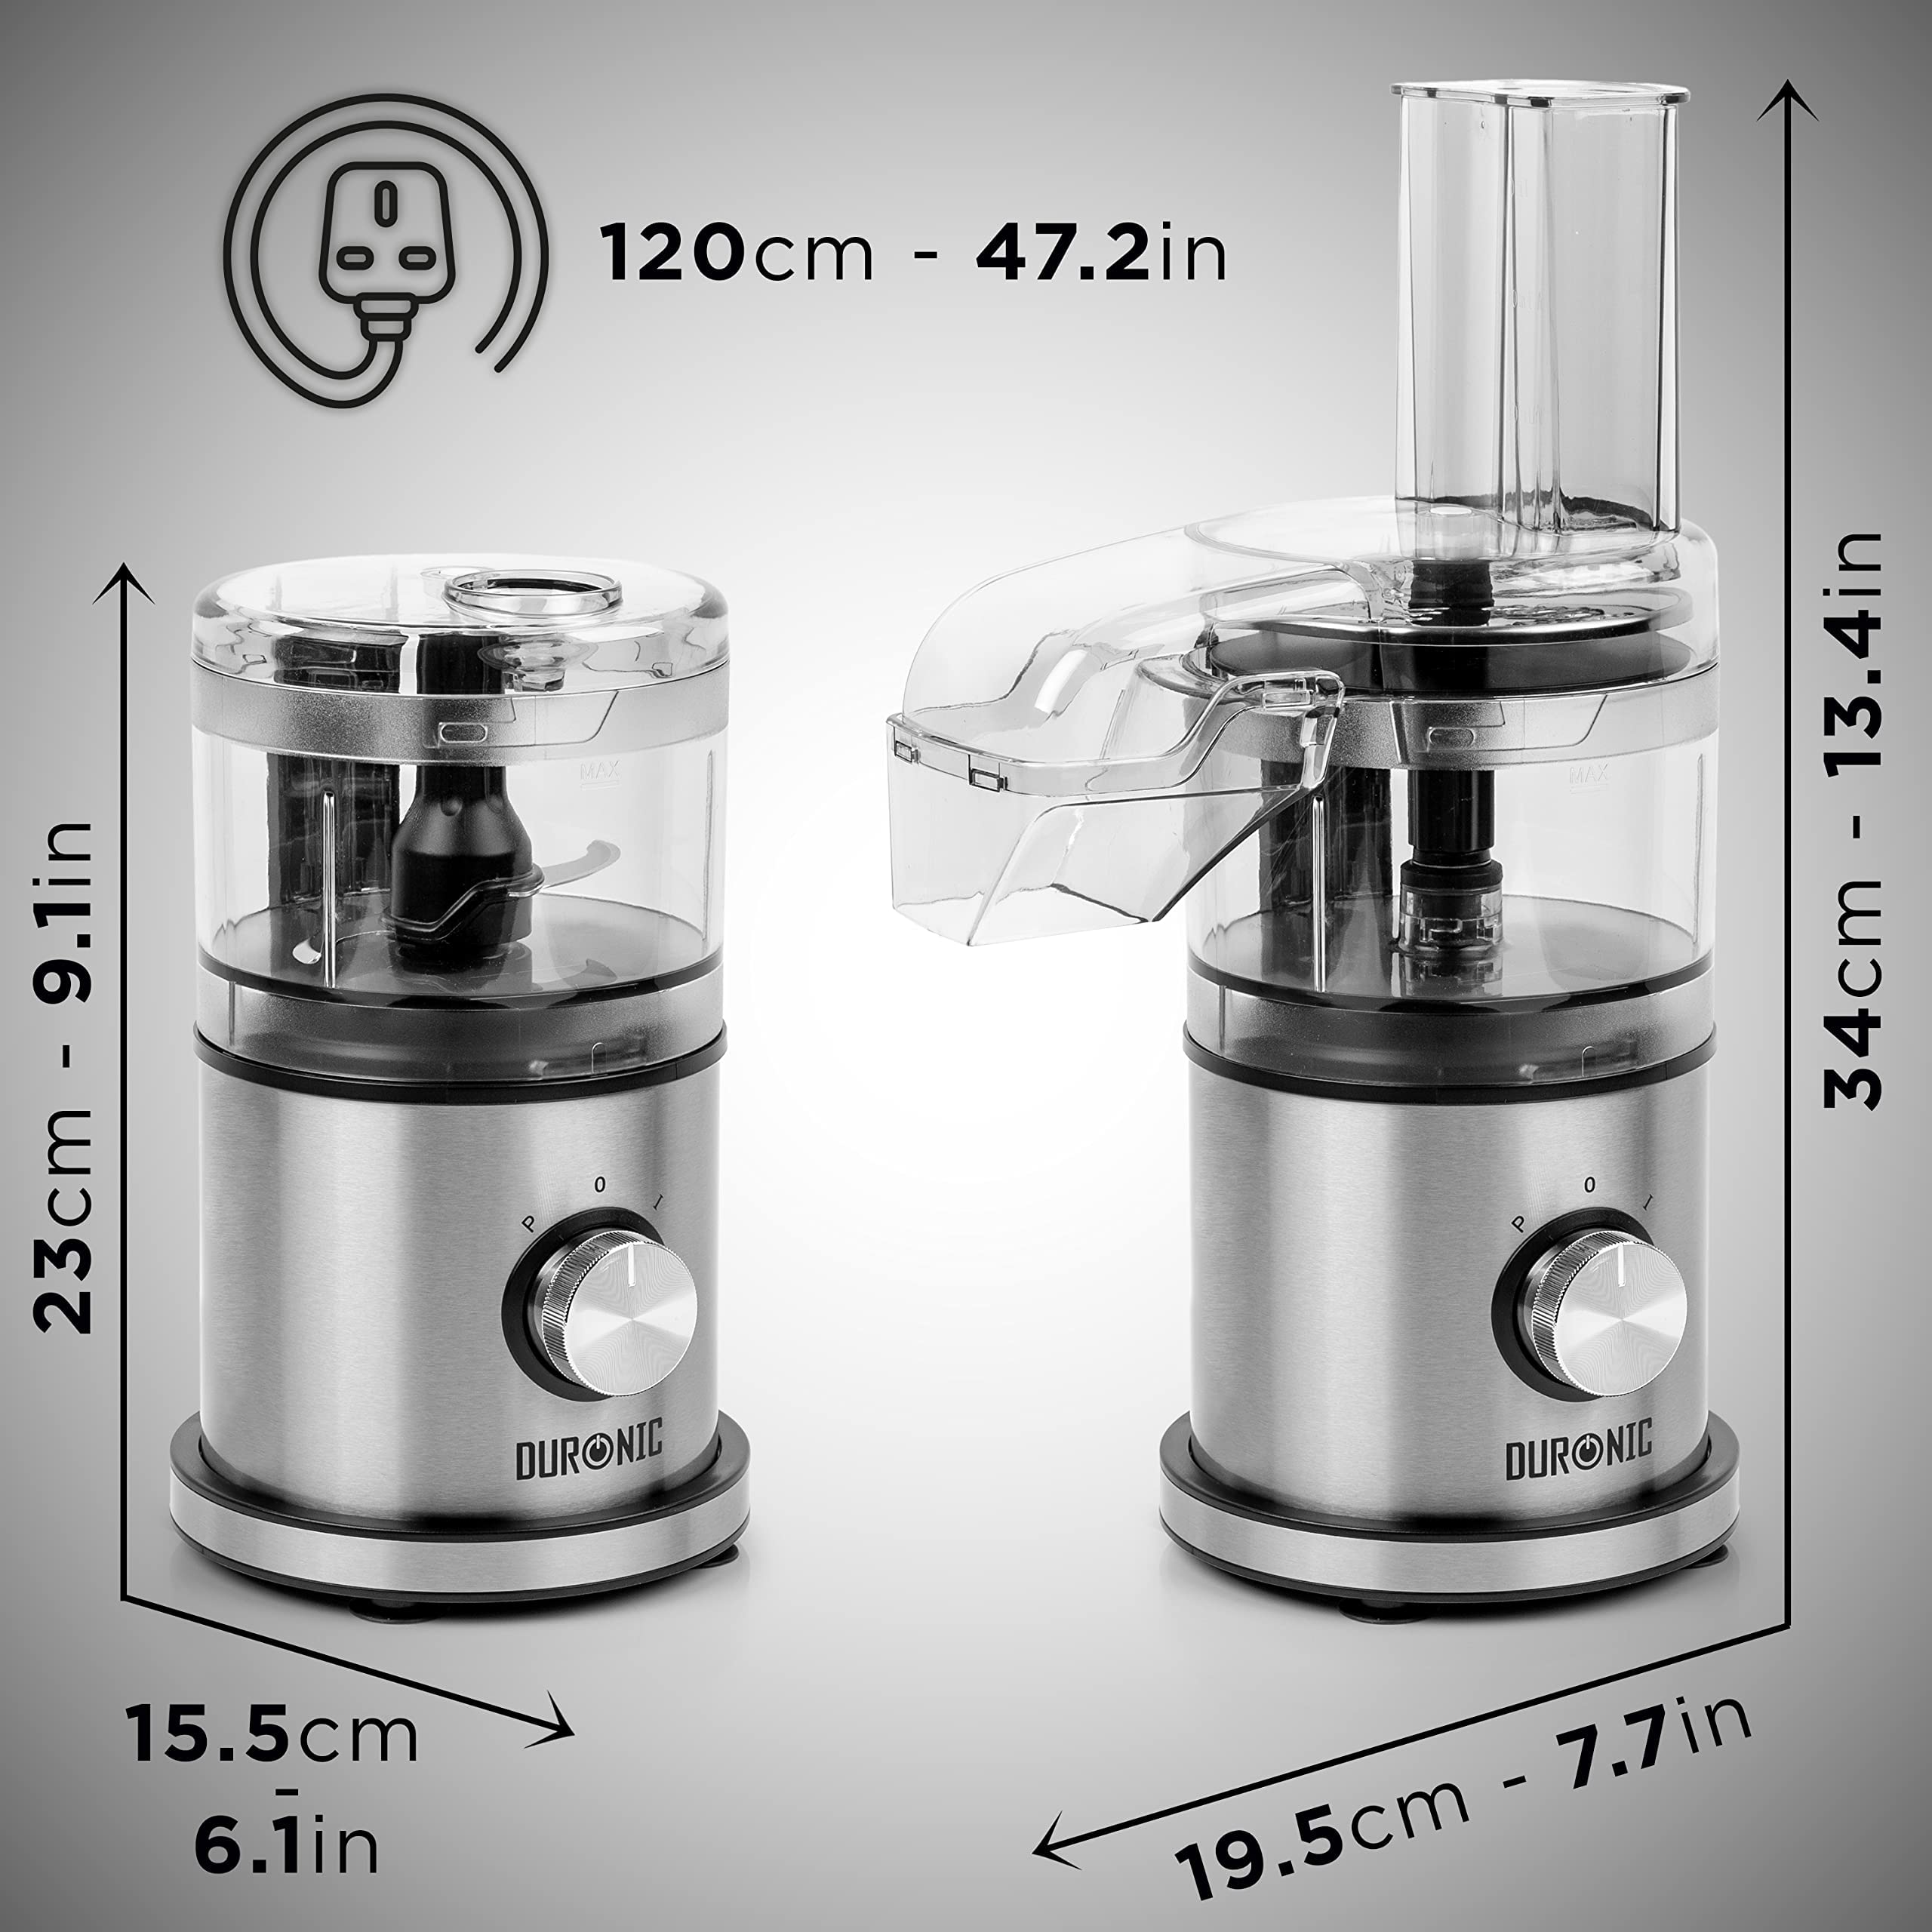 Duronic 2-in-1 Mini Food Processor and Chopper MFP400, Small Food Processor with Grater, Electric Chopper, Chops and Blends, 400W, 500ml